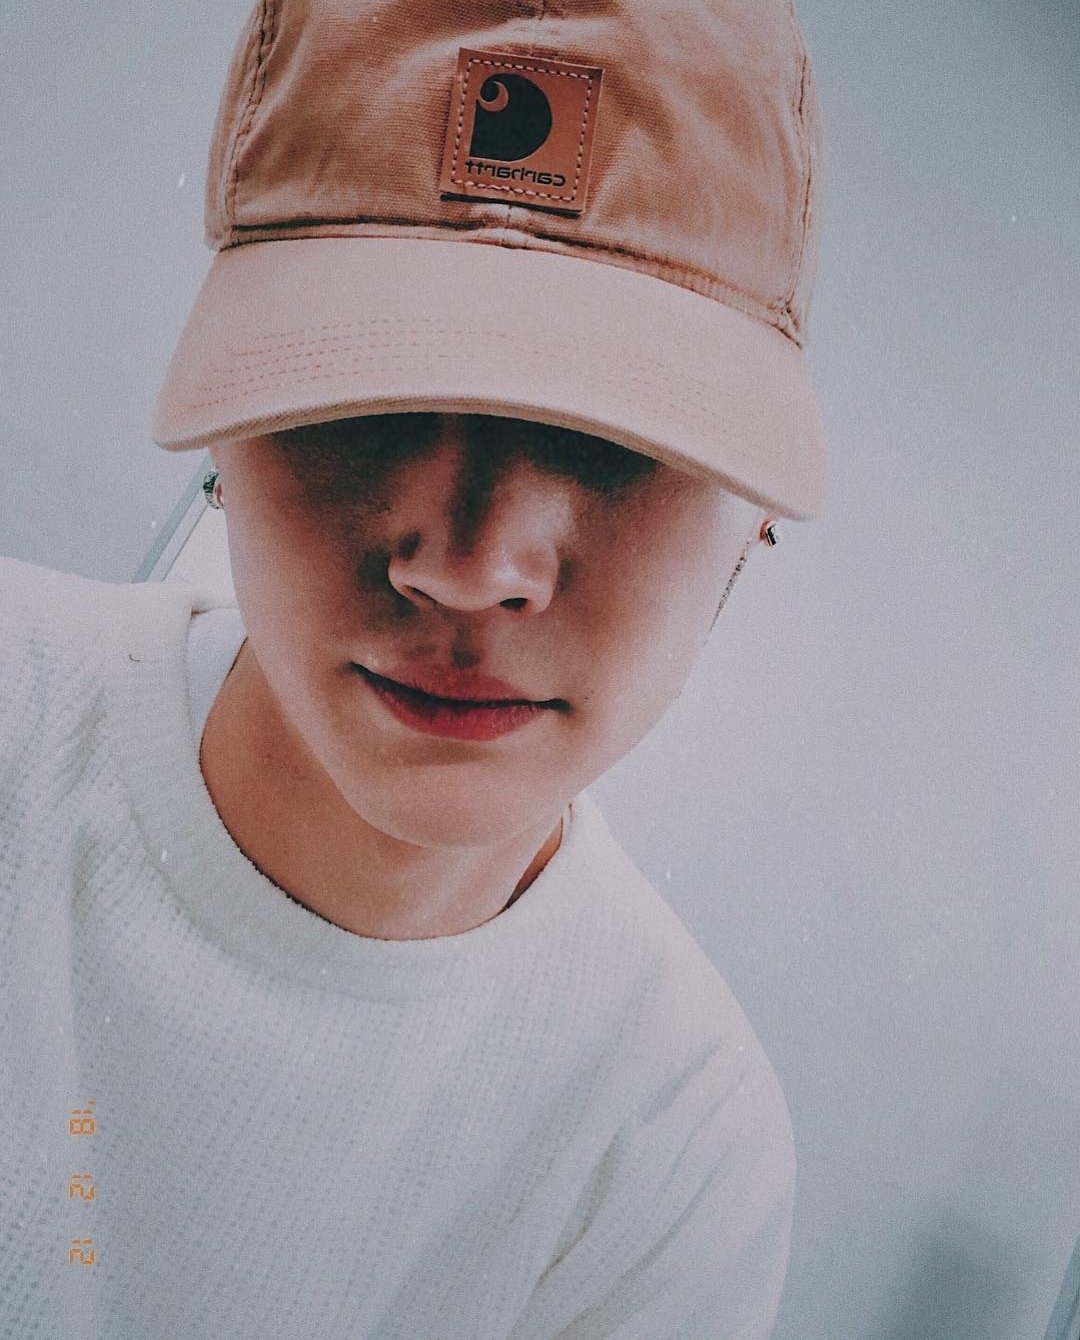 GOT7's fashion (fan account) on Twitter: "[181212] Jaebum posted an  instagram picture of himself wearing CARHARTT WIP - Canvas Logo Ball Cap.  It's available for $45 USD. Check it out here: https://t.co/STkf5N9MeY